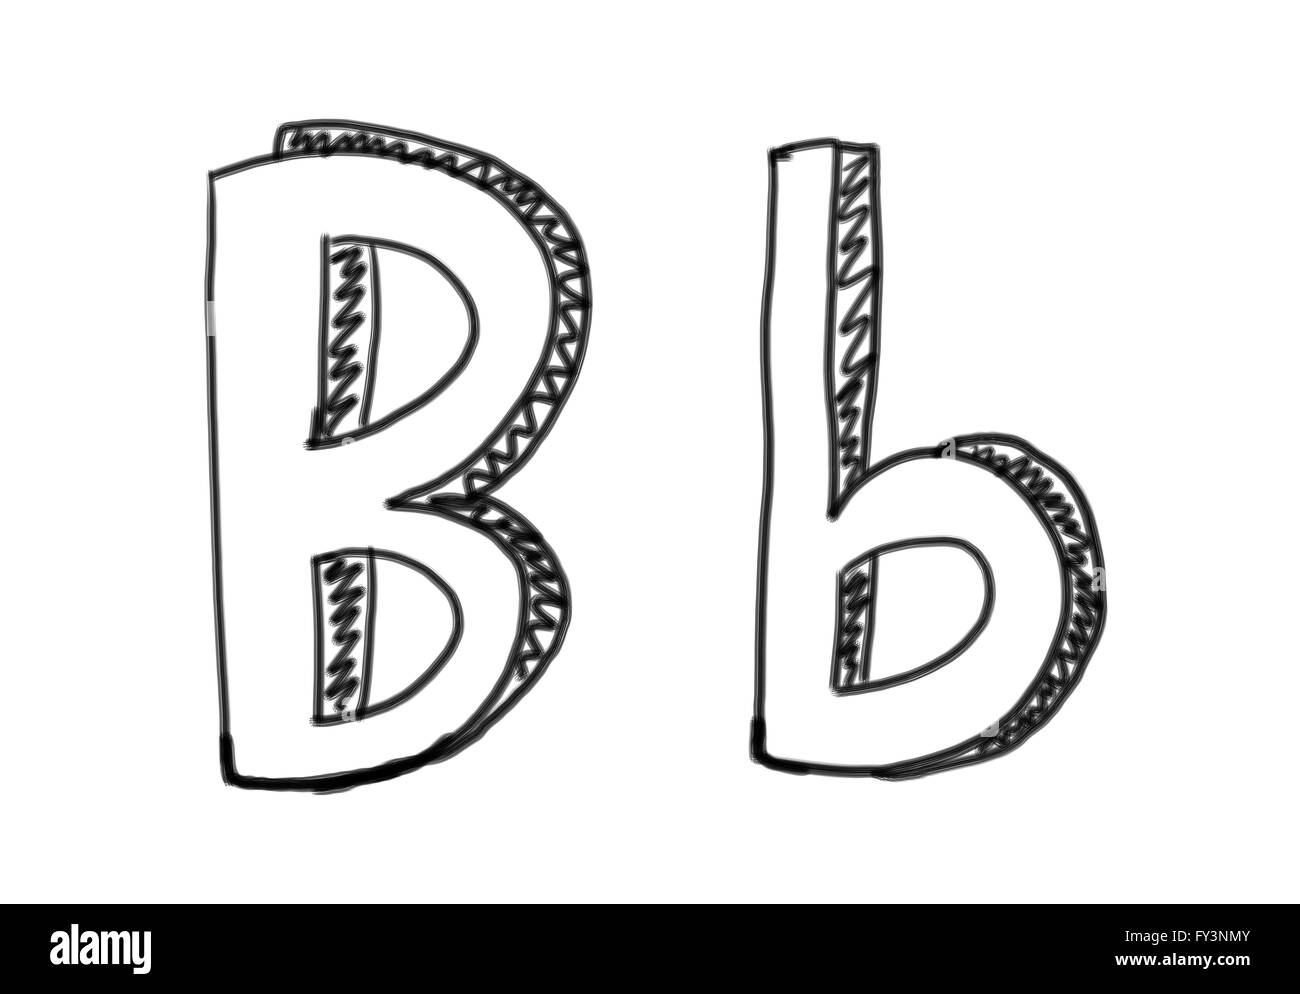 New drawing Character B of alphabet logo icon in design elements. Stock Photo